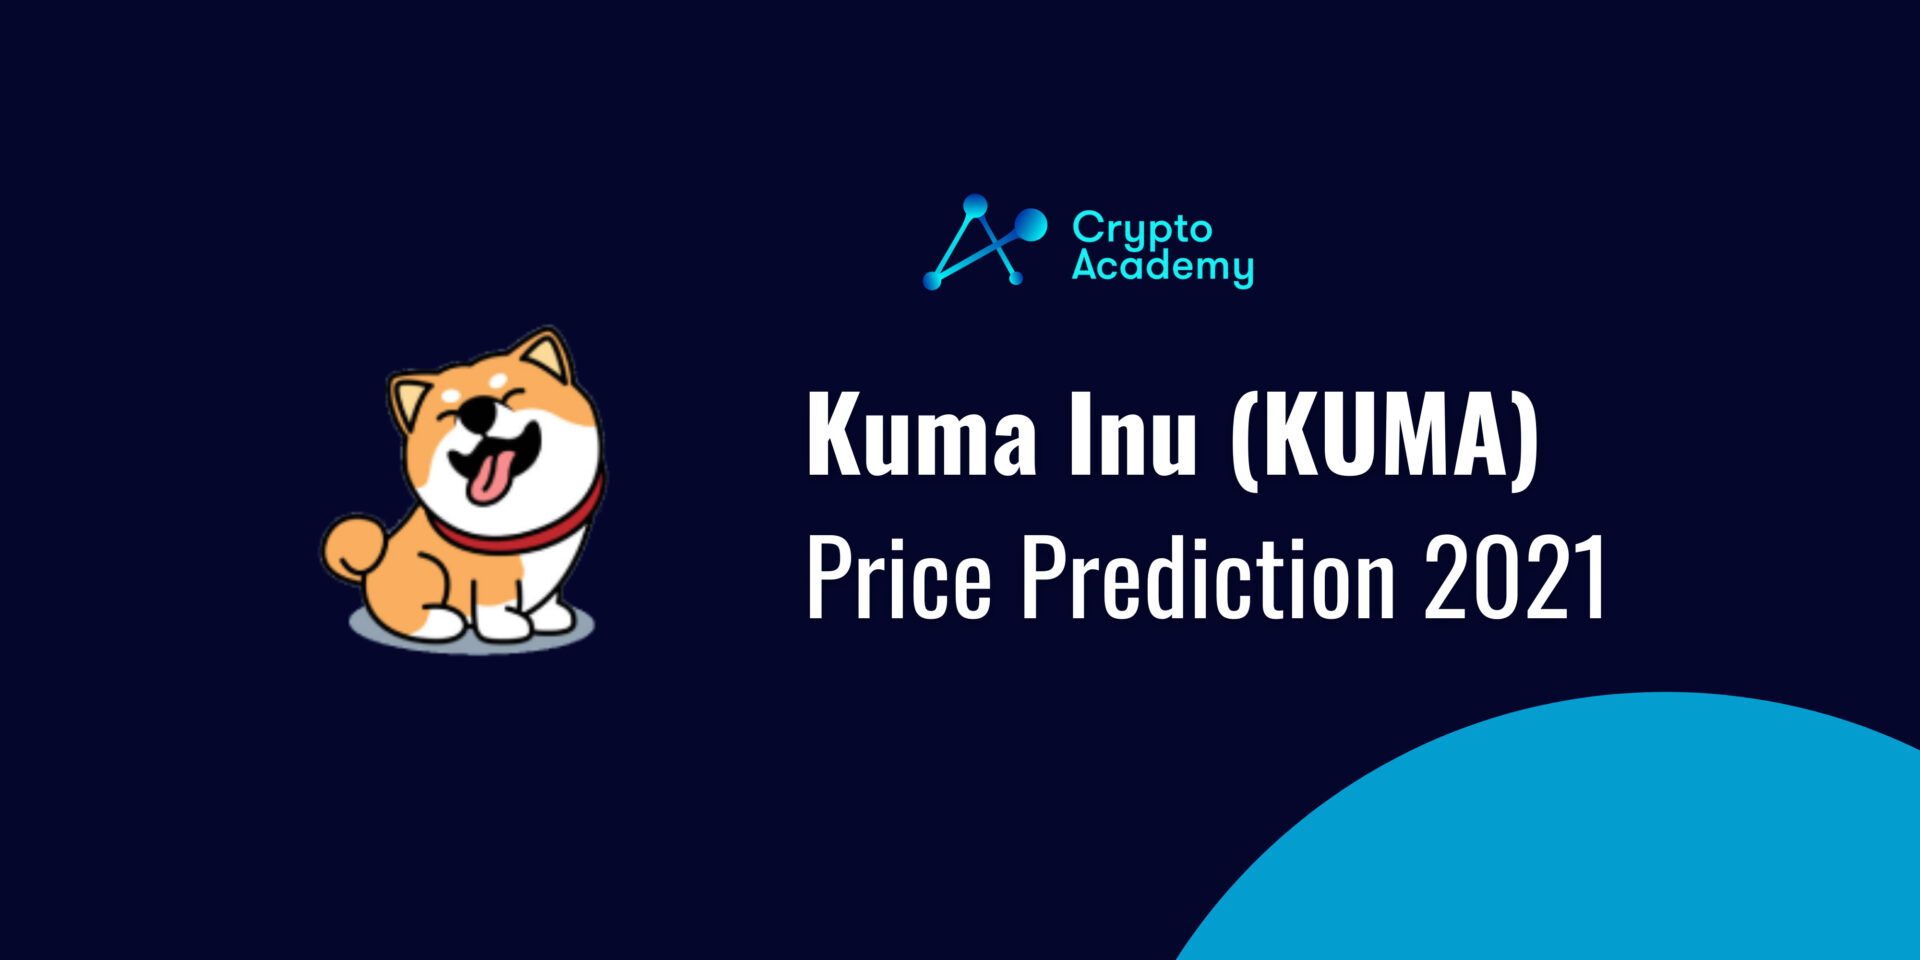 Kuma Inu Price Prediction 2021 – What Will KUMA Price be by the End of 2021?